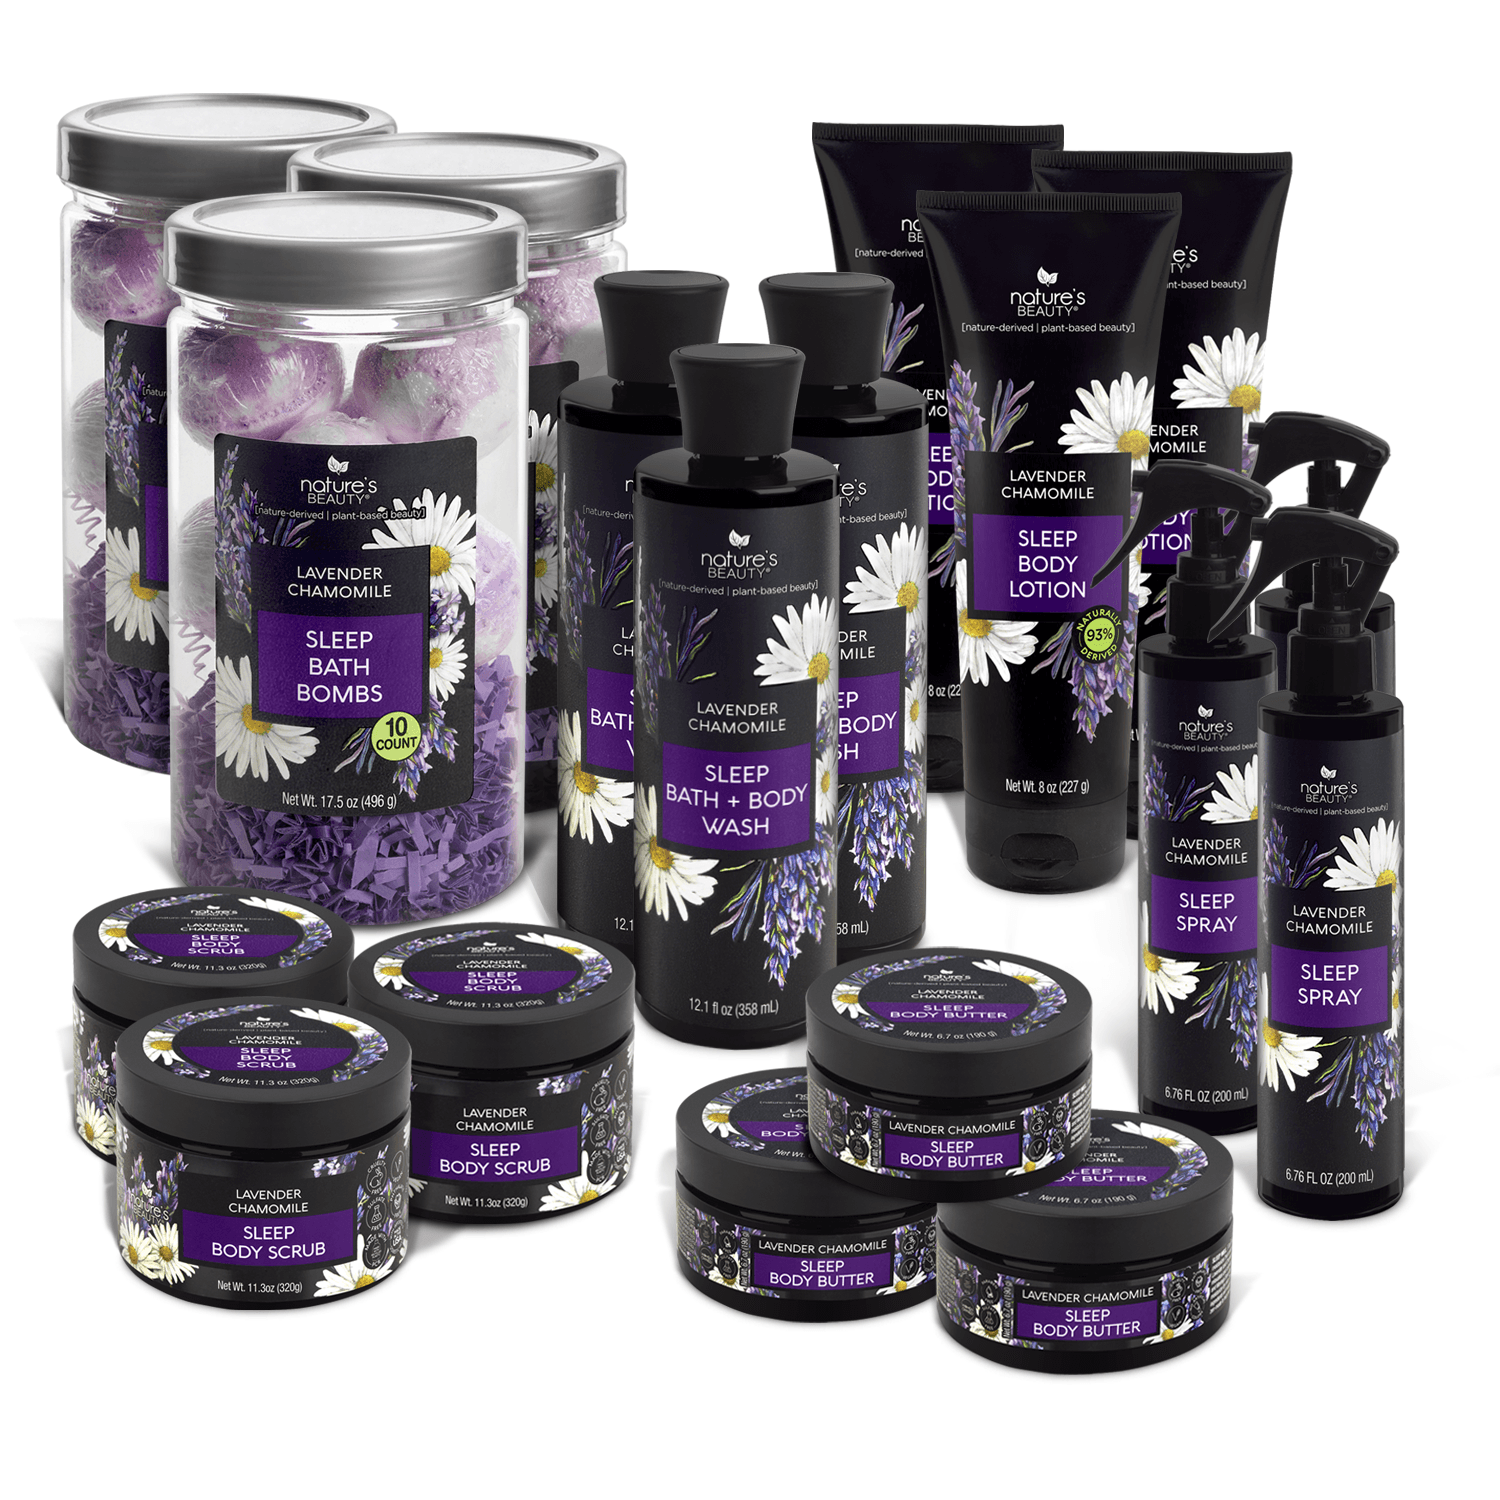 Lavender Chamomile Sleep Solution Set Nature's Beauty Body Care Buy 2 Get 1 Free 